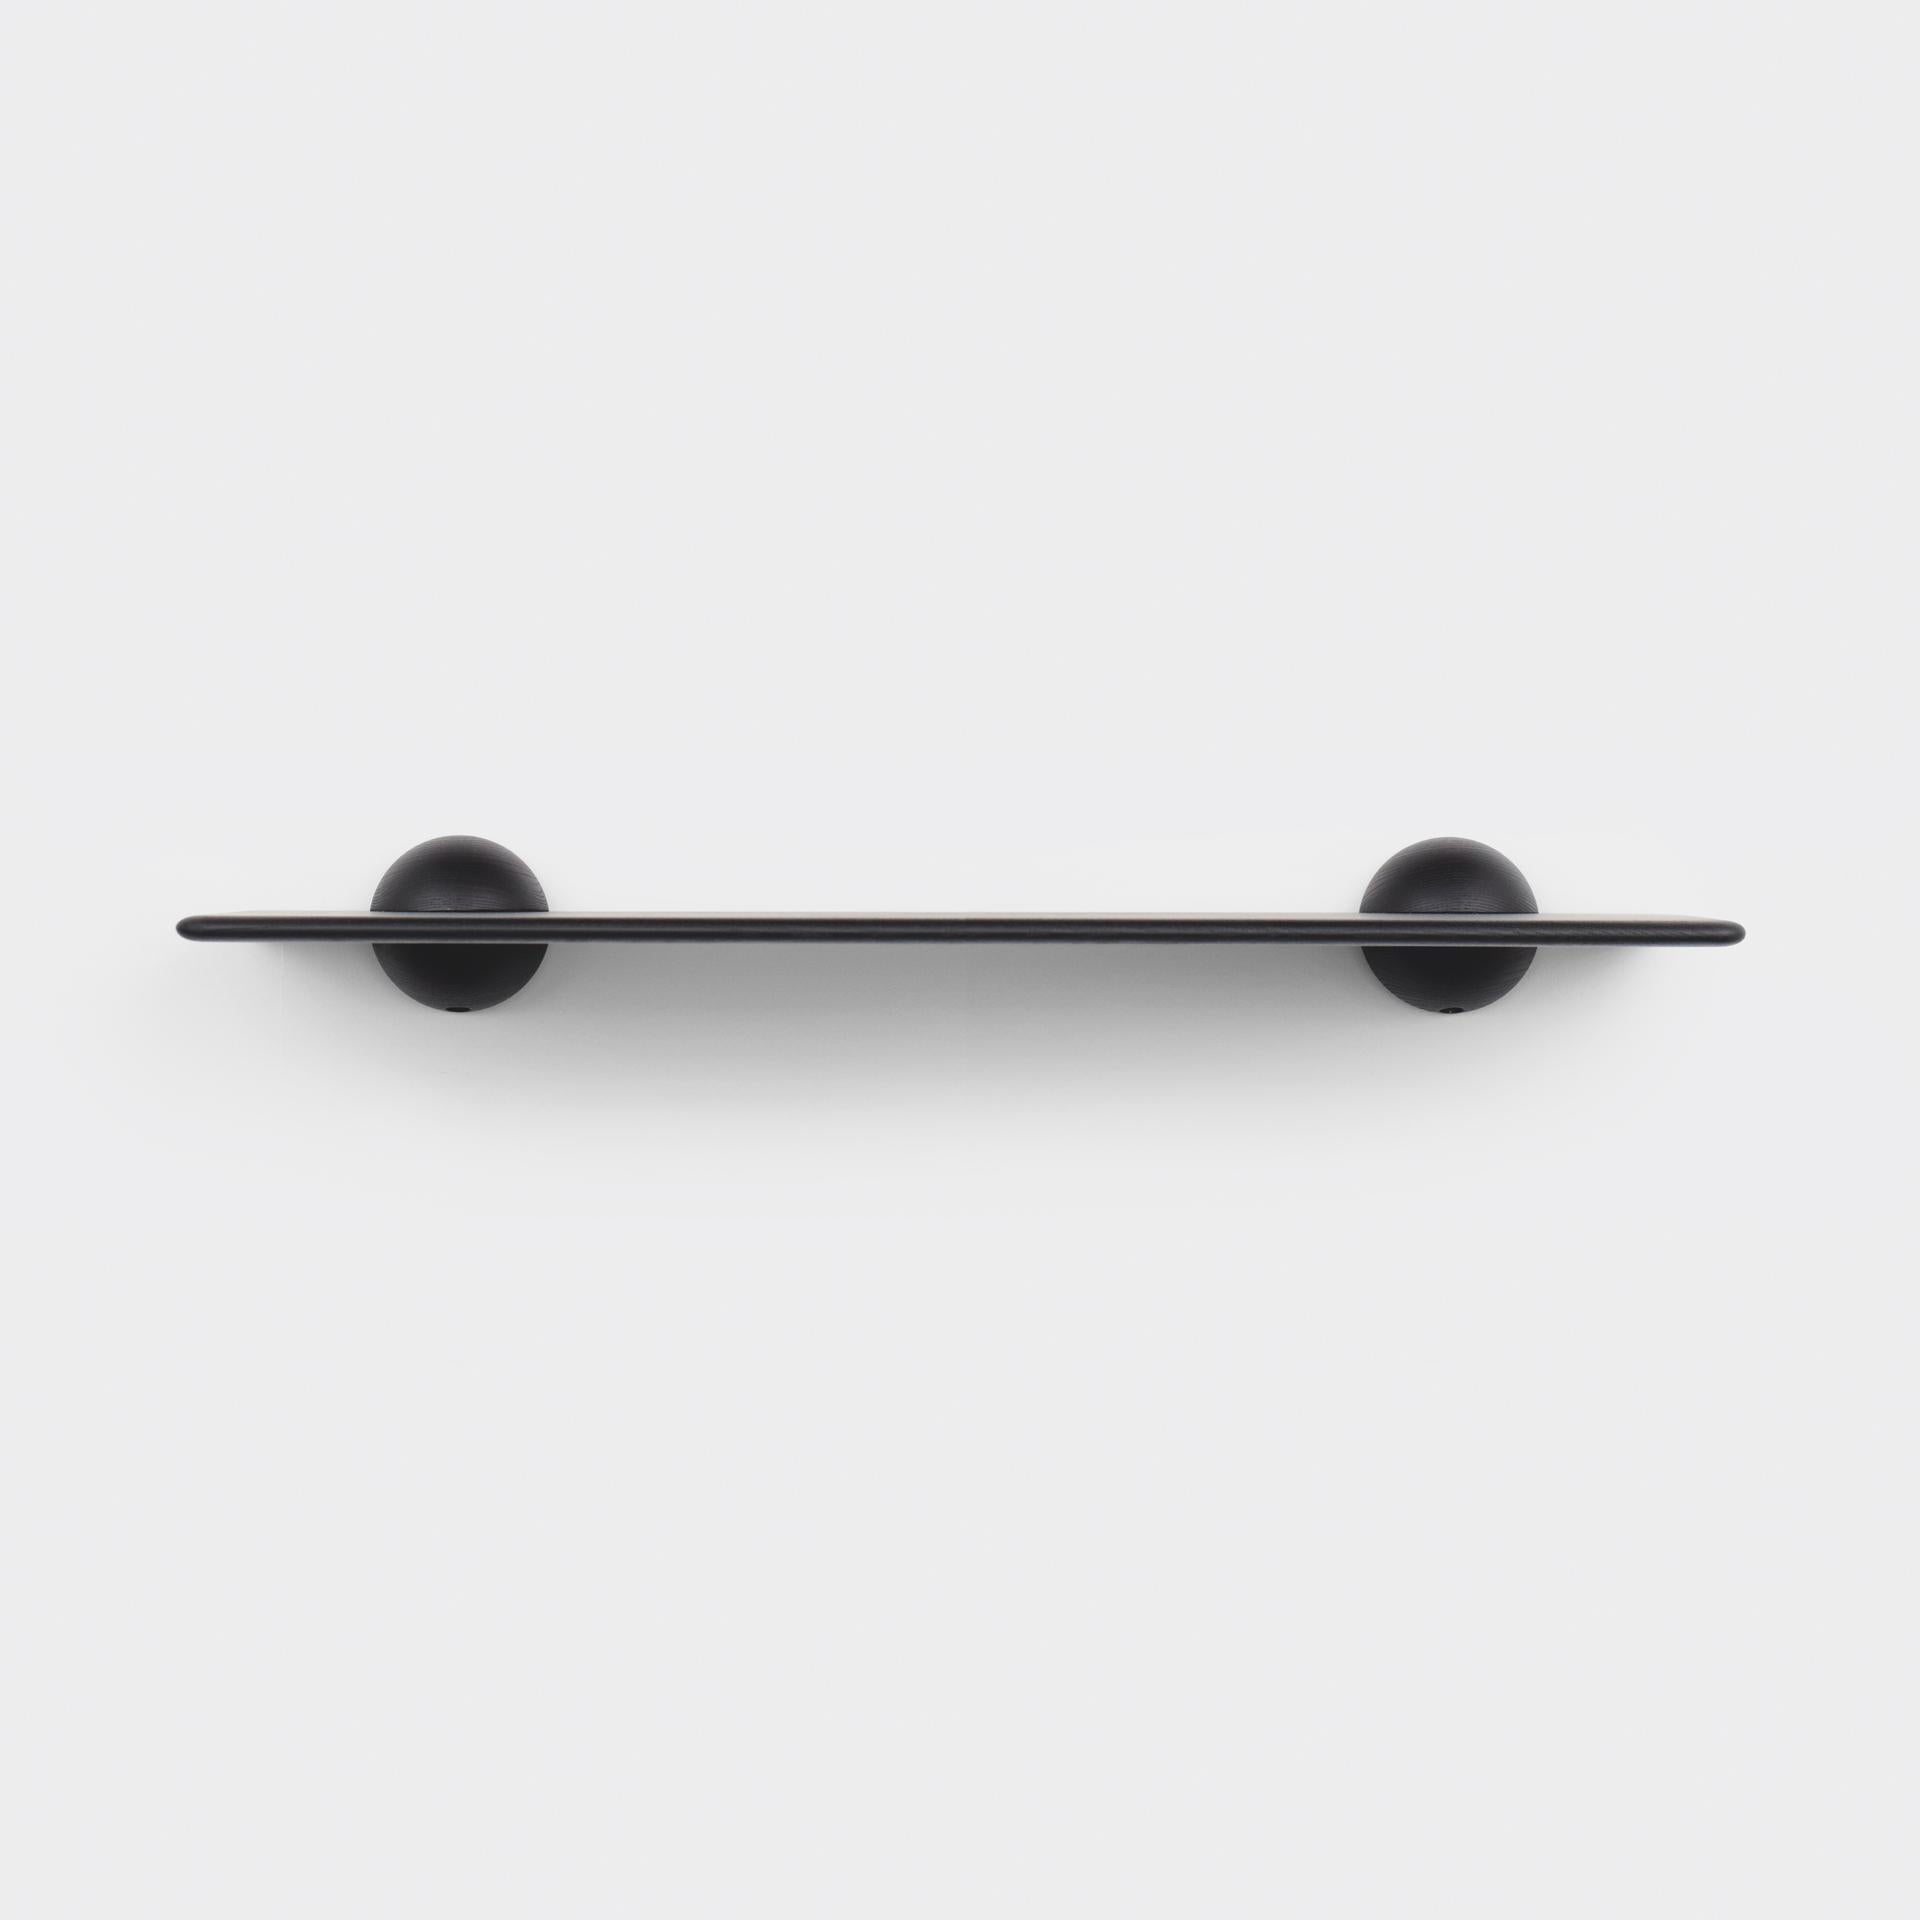 The half sphere holding the plane contributes to a bold yet minimal look that works well in several different spaces and environments. Whether used as a shelf or as a bar table it is present with its distinct form without taking over. Combining the